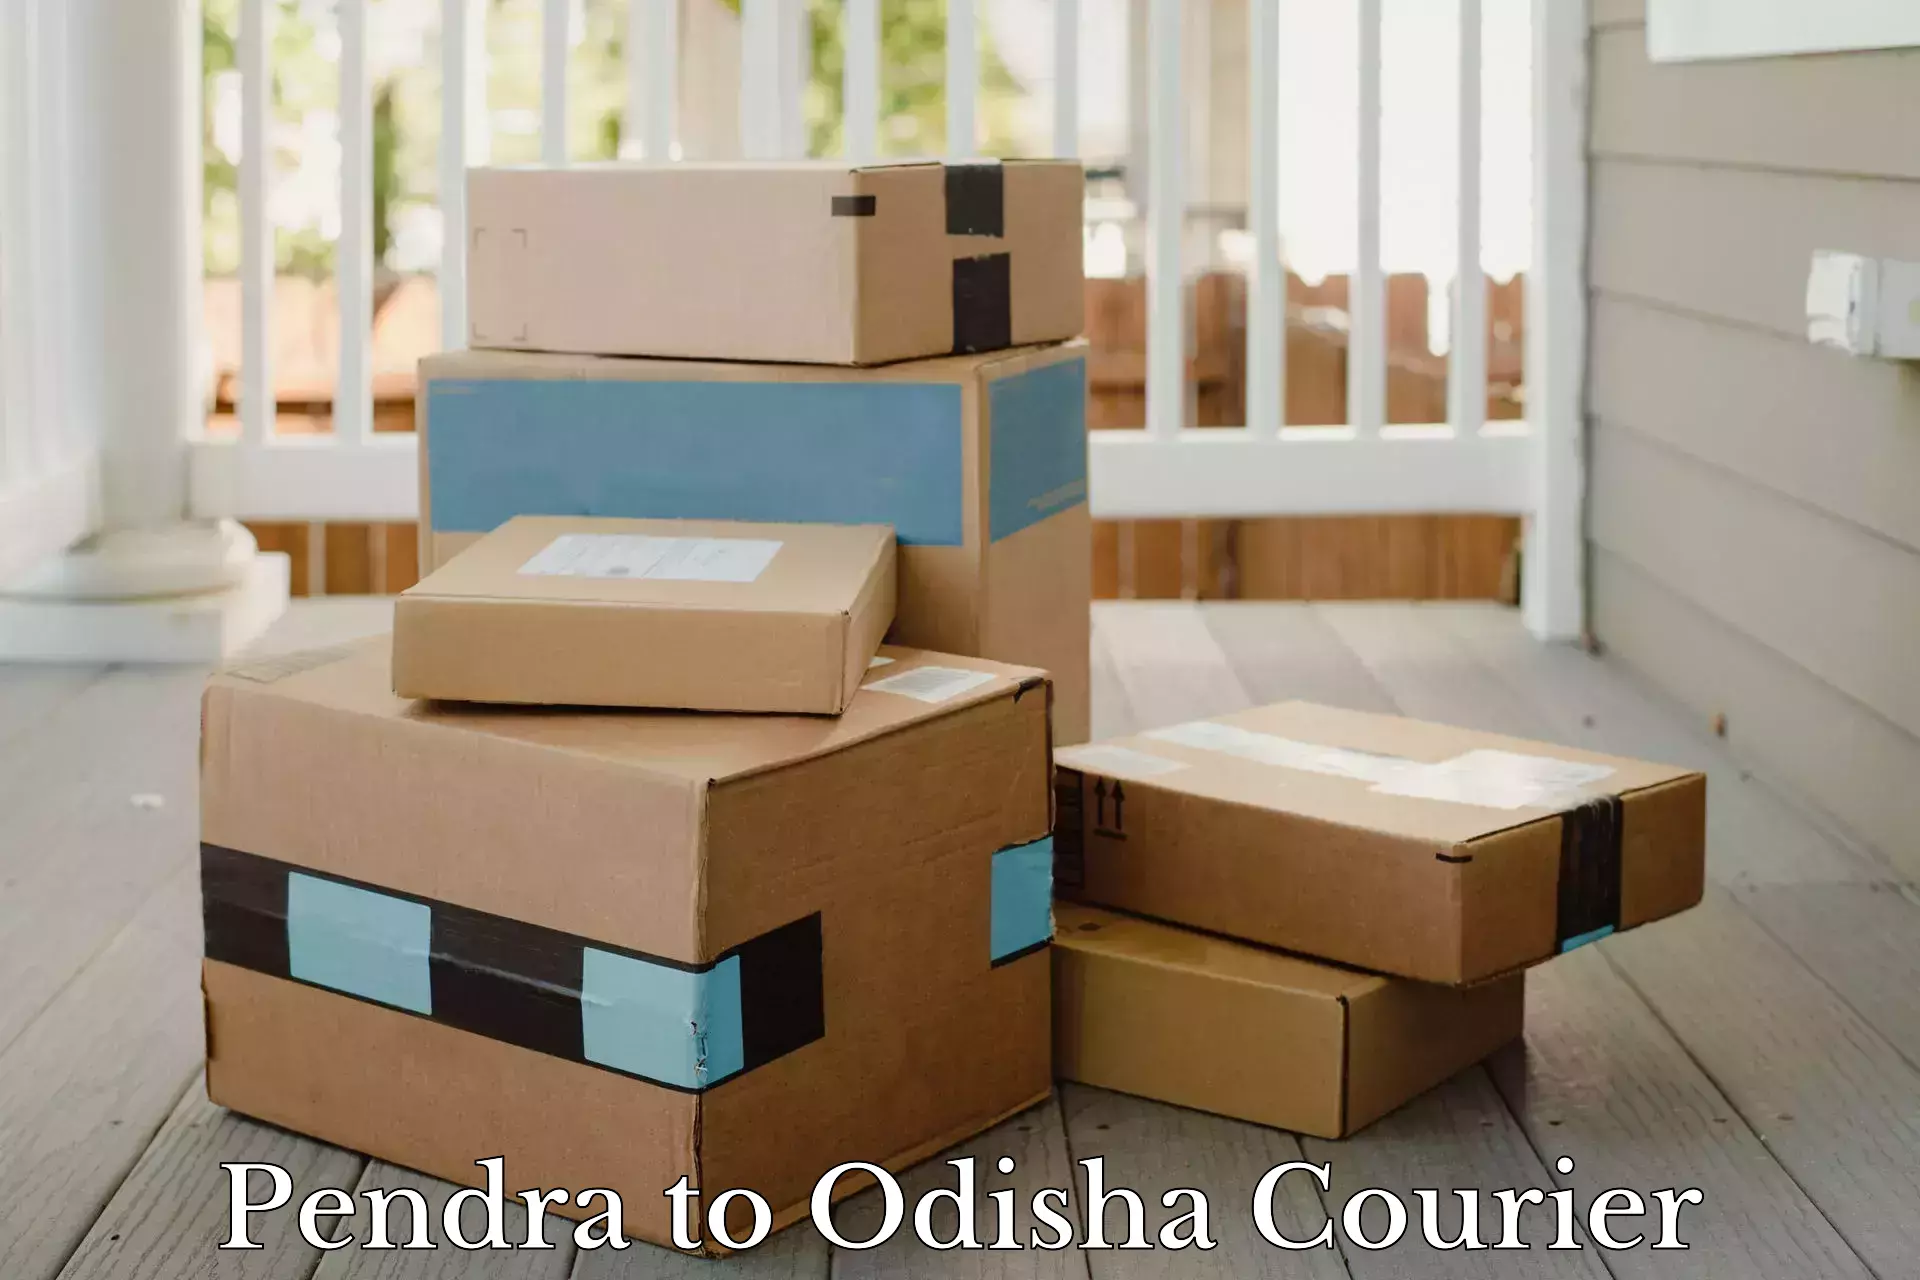 Efficient shipping platforms in Pendra to Cuttack